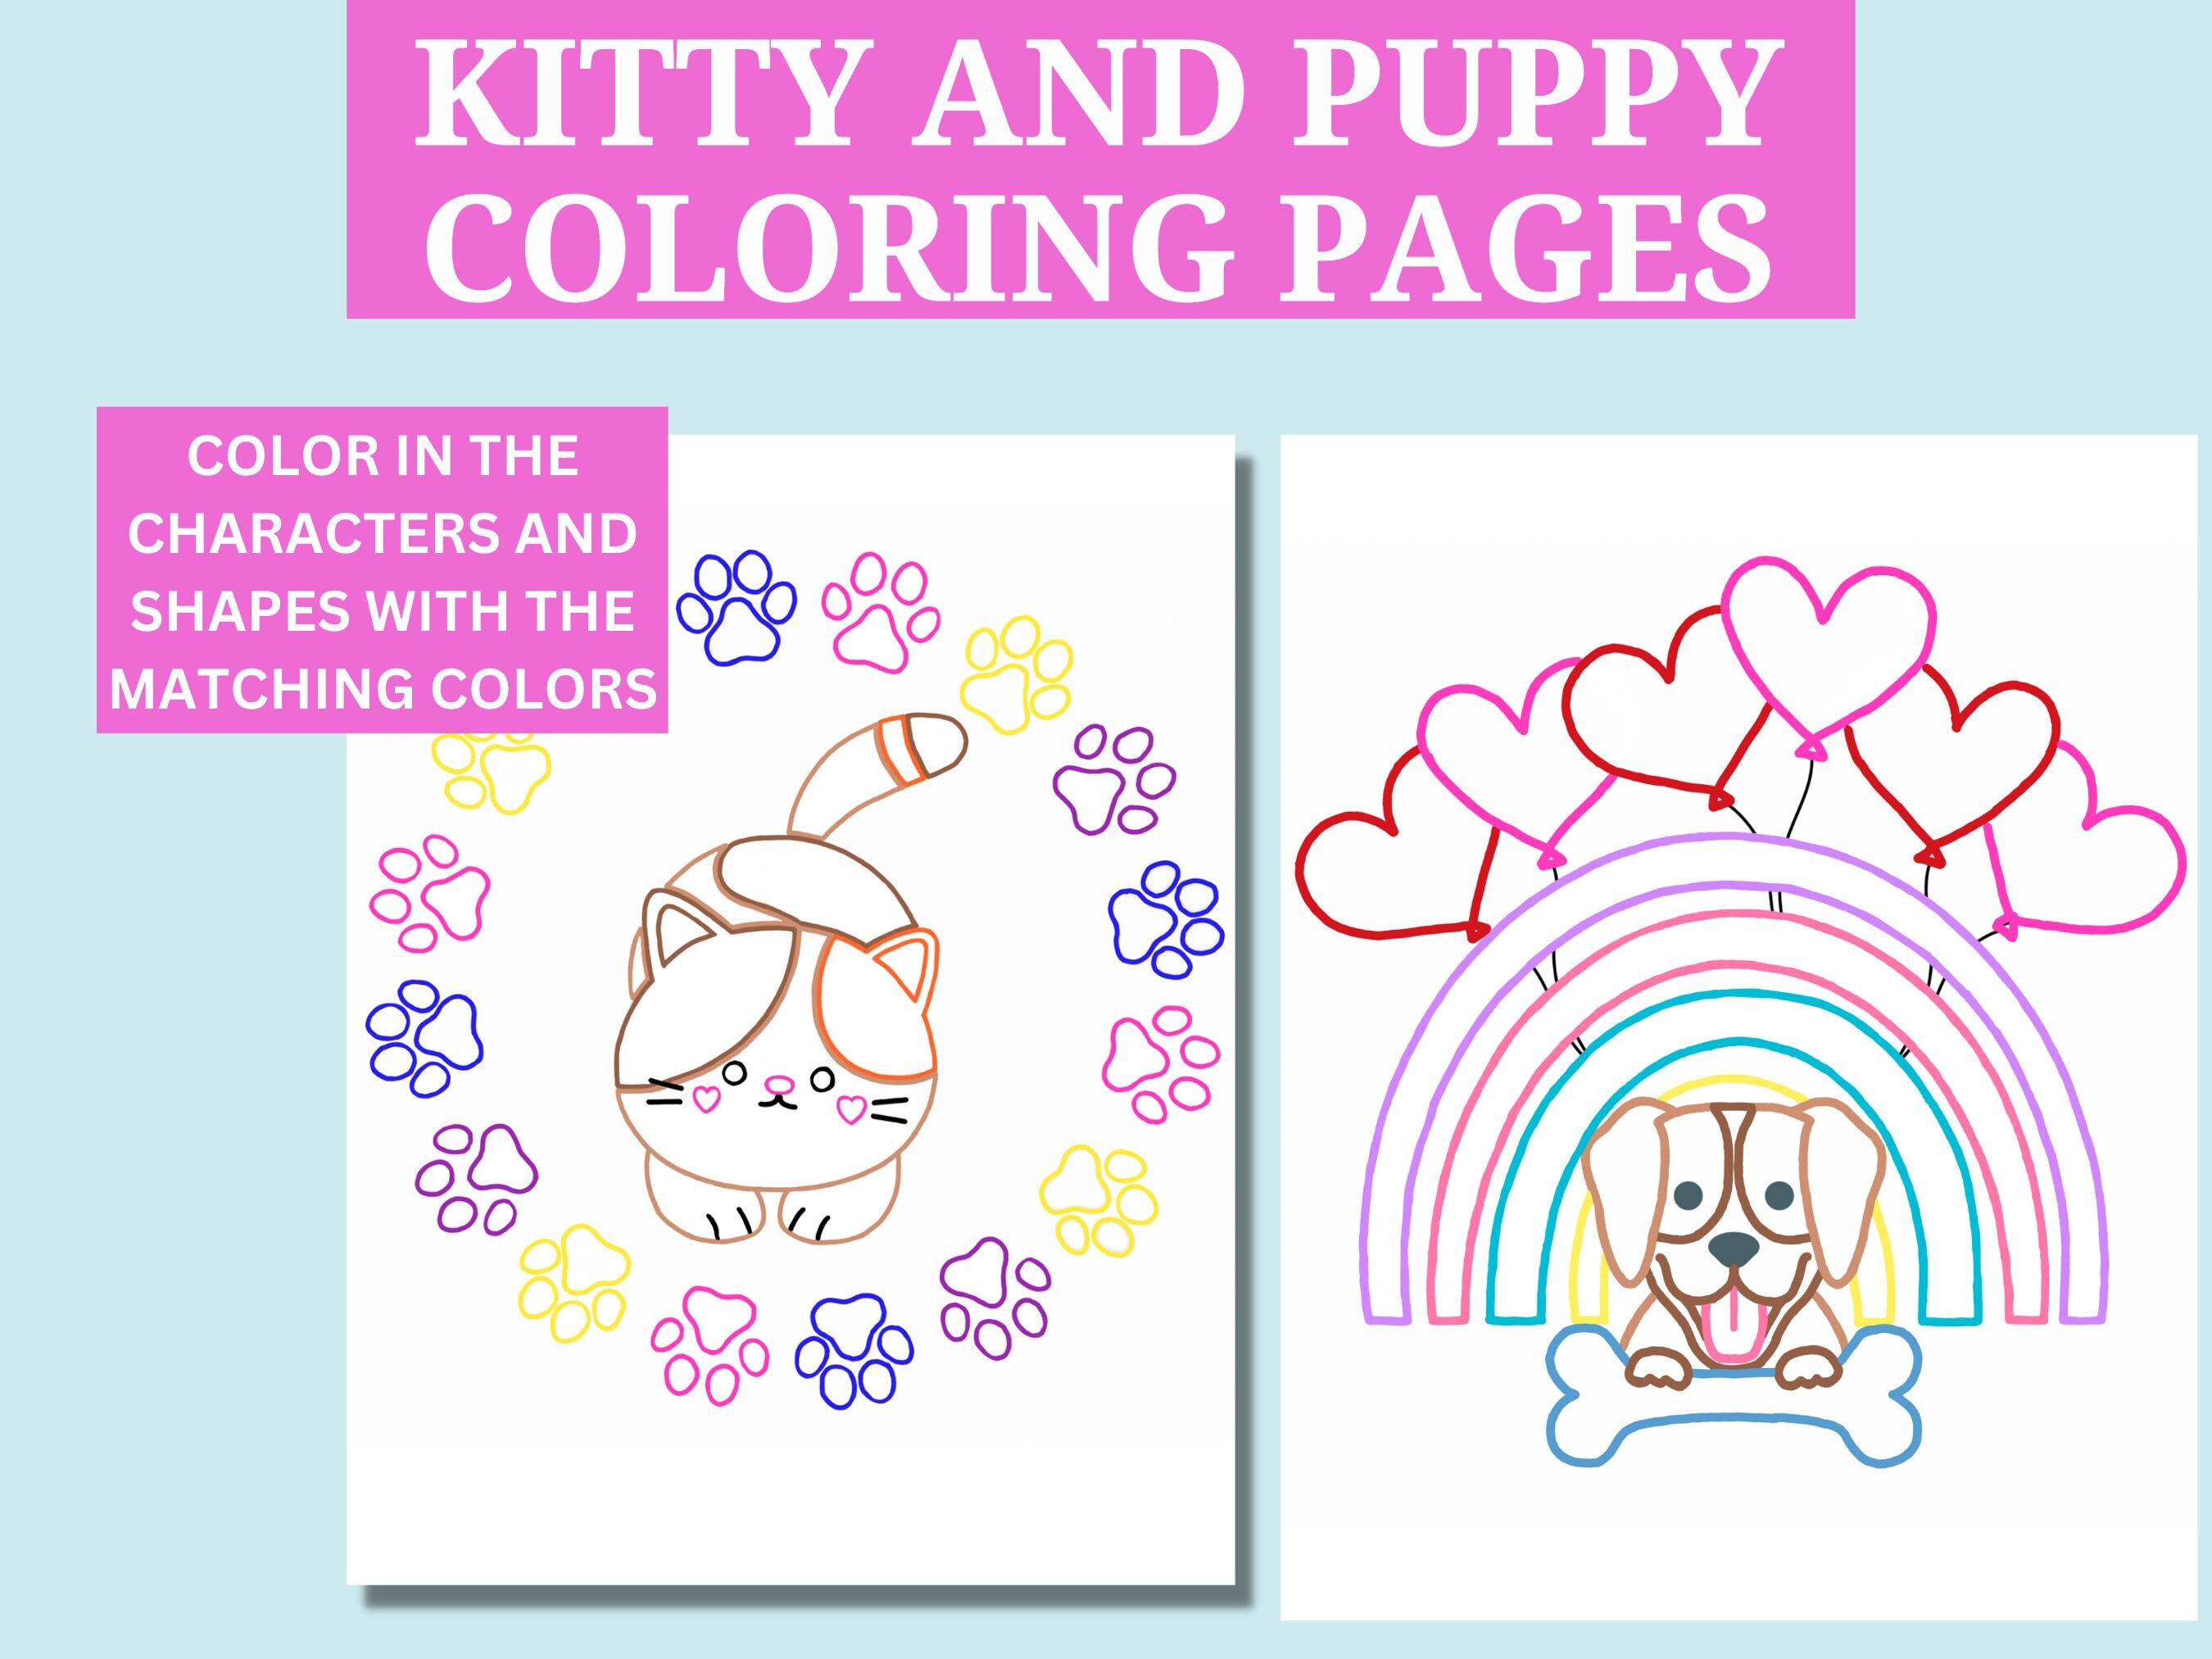 Kitten coloring pages puppy coloring pages preschool coloring pages animal coloring pages valentine coloring pages girl coloring pages